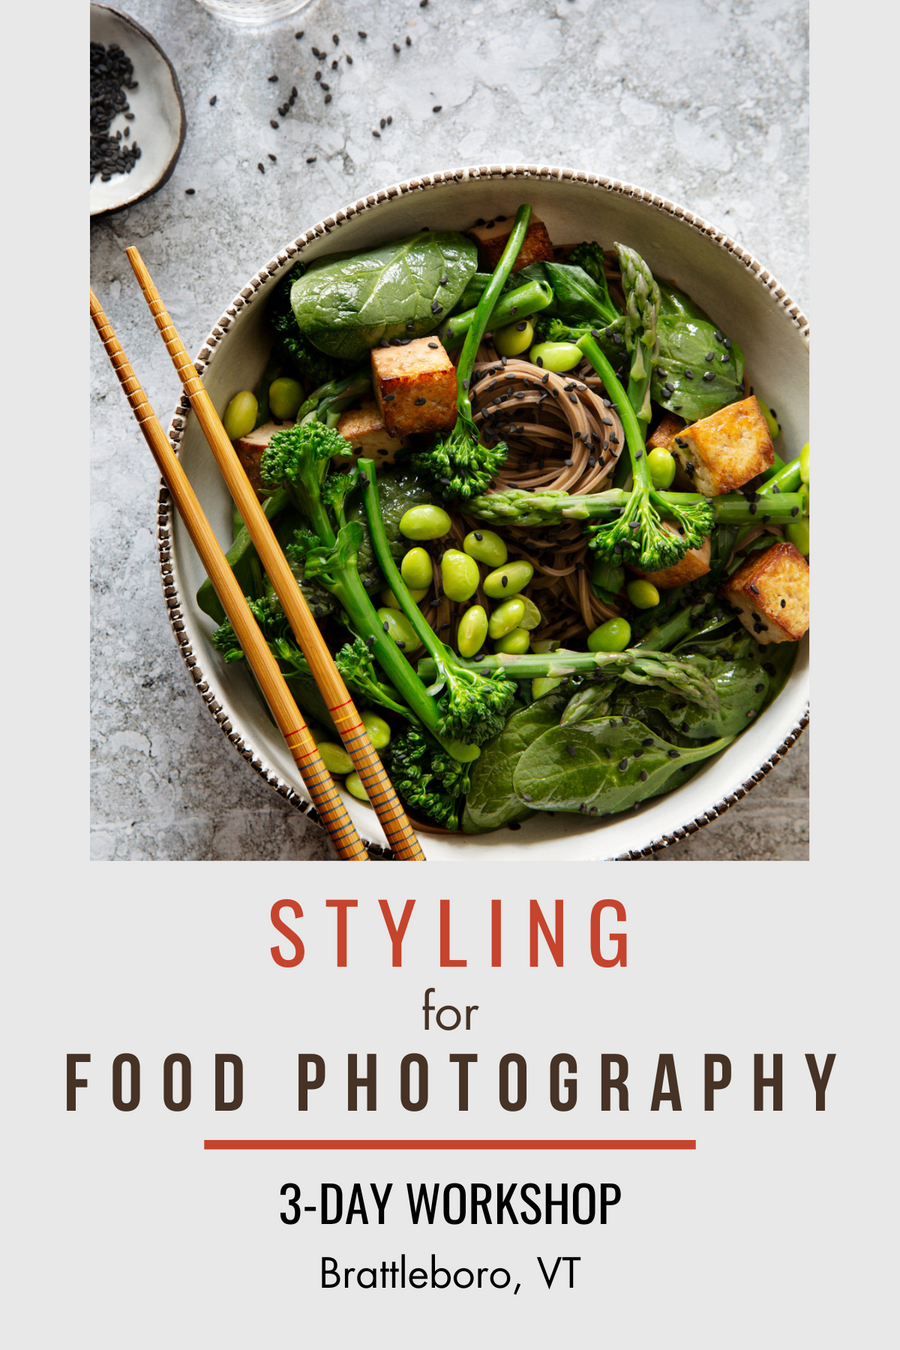 STYLING for Food Photography